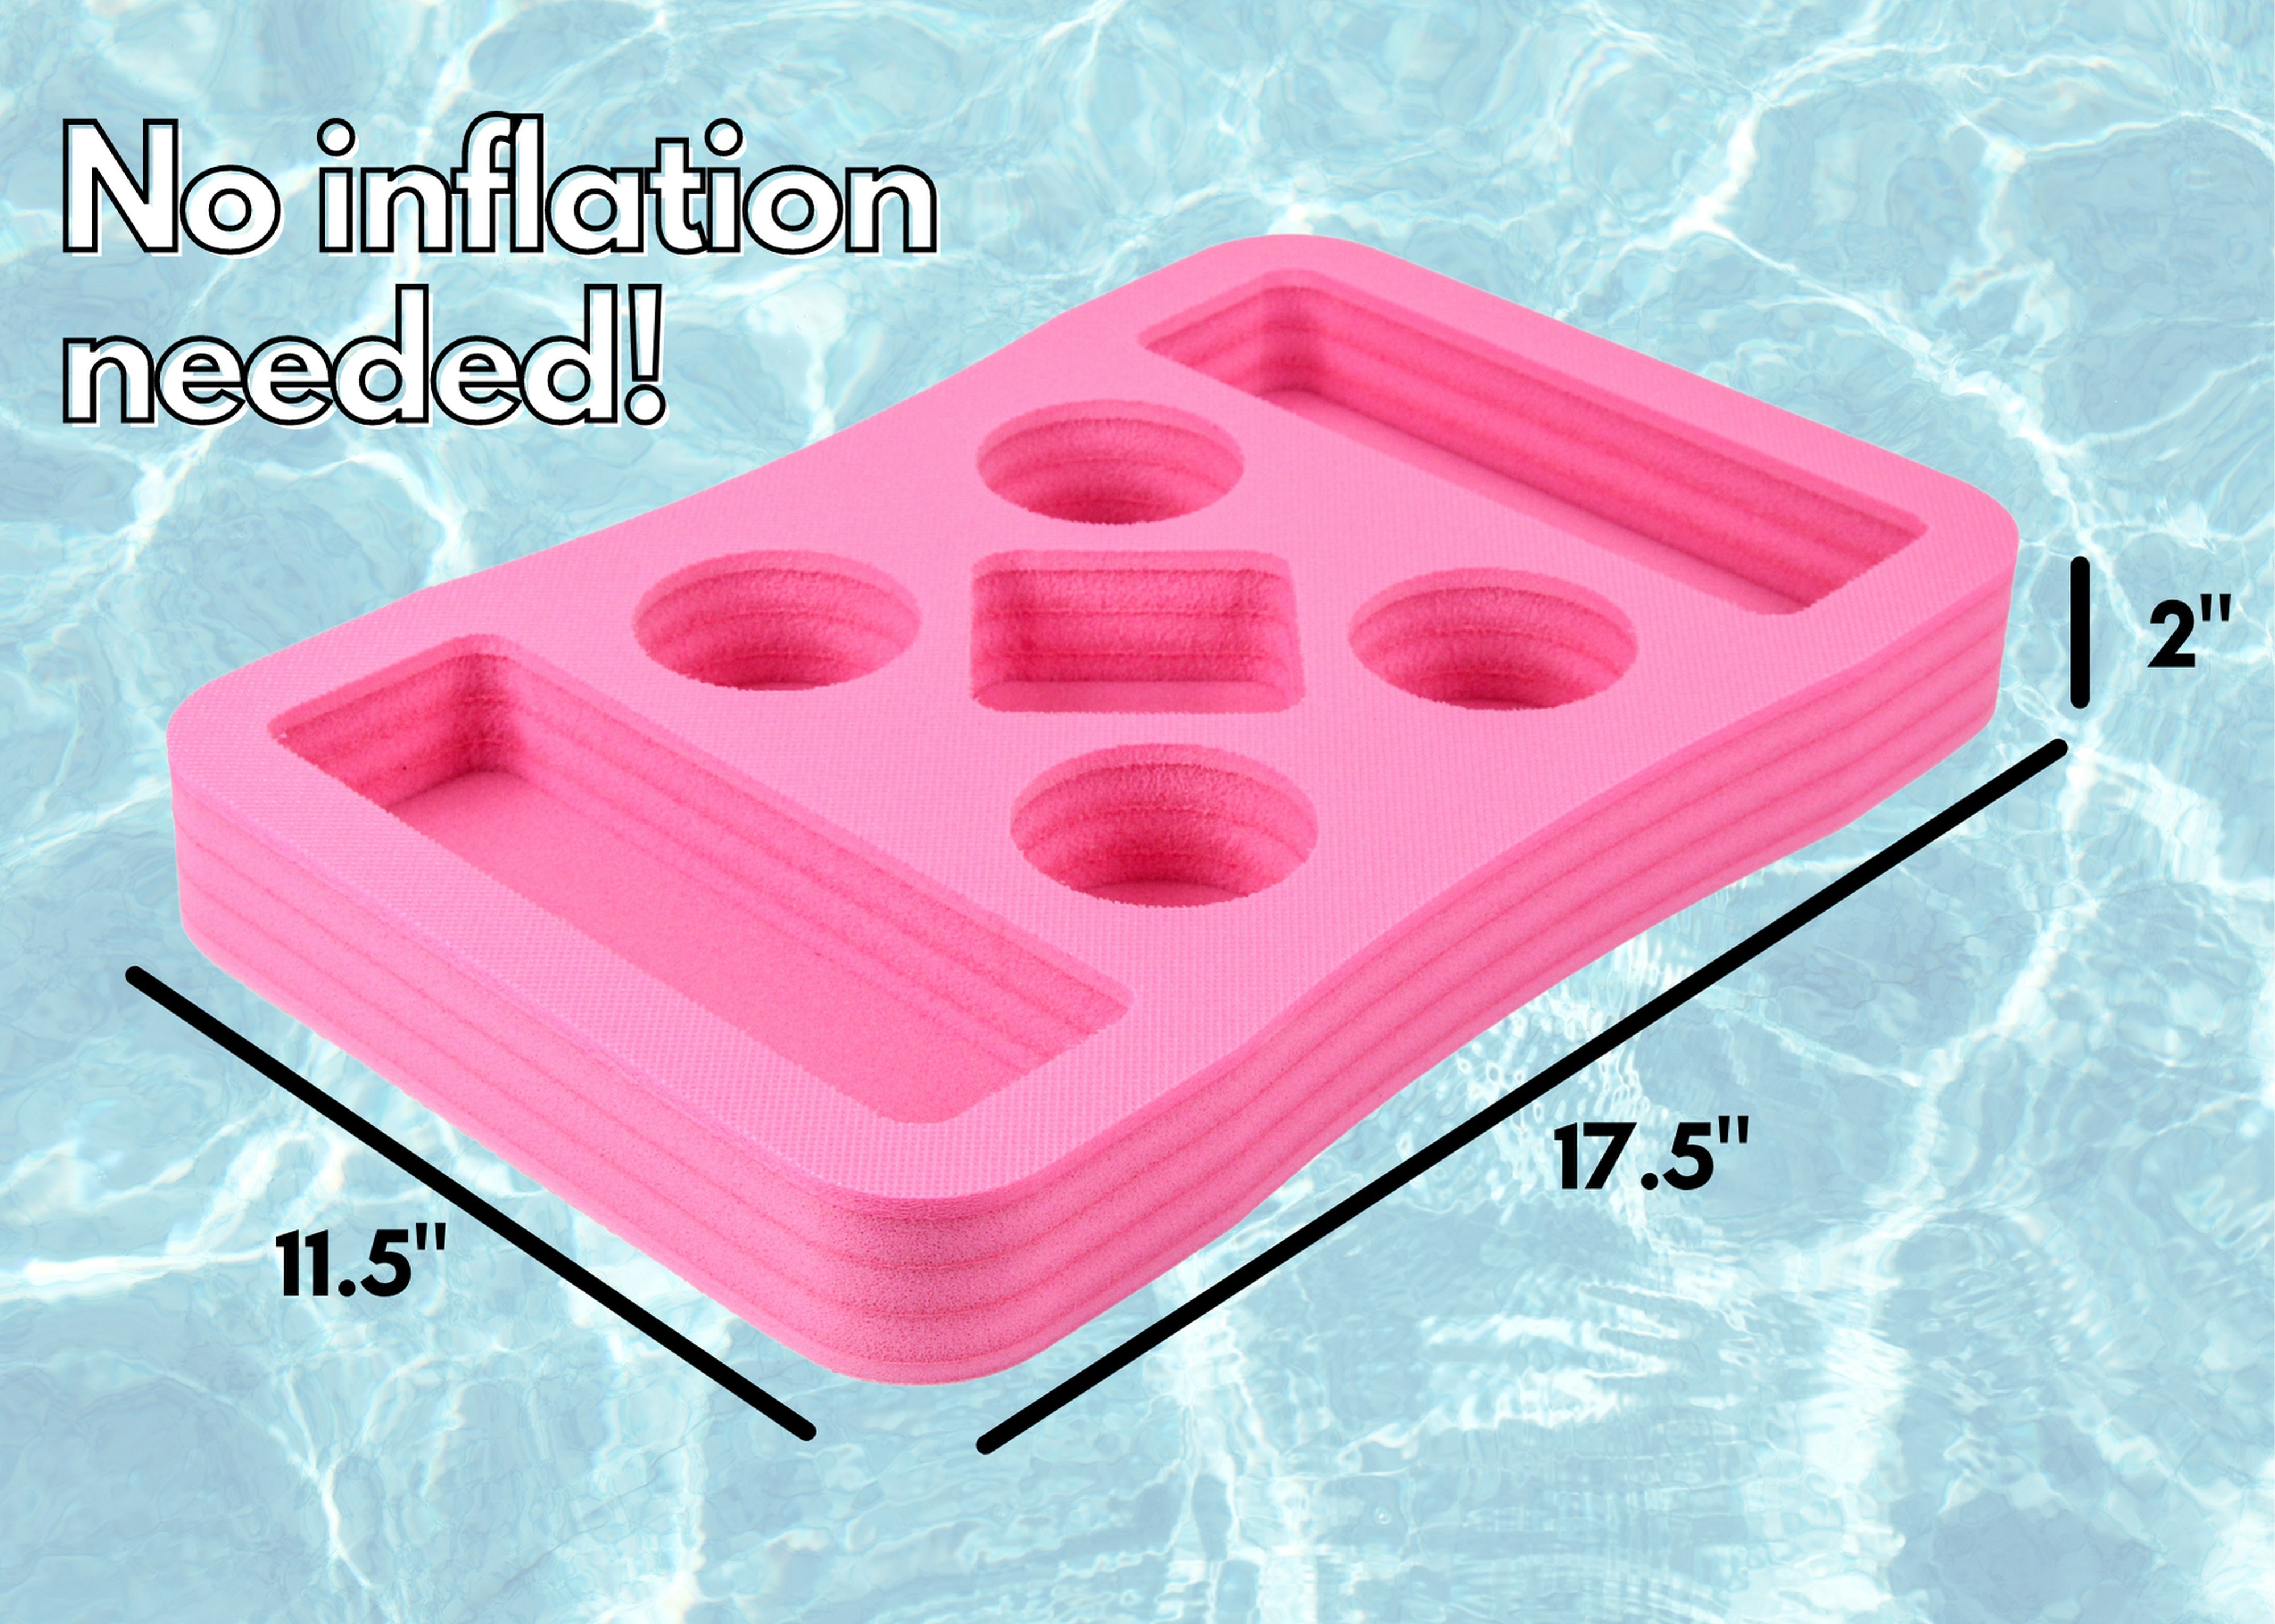 Floating Drink Holder Refreshment Spa Hot Tub Bar Table Tray for Pool or Beach Party Float Lounge Durable Foam 7 Compartment UV Resistant